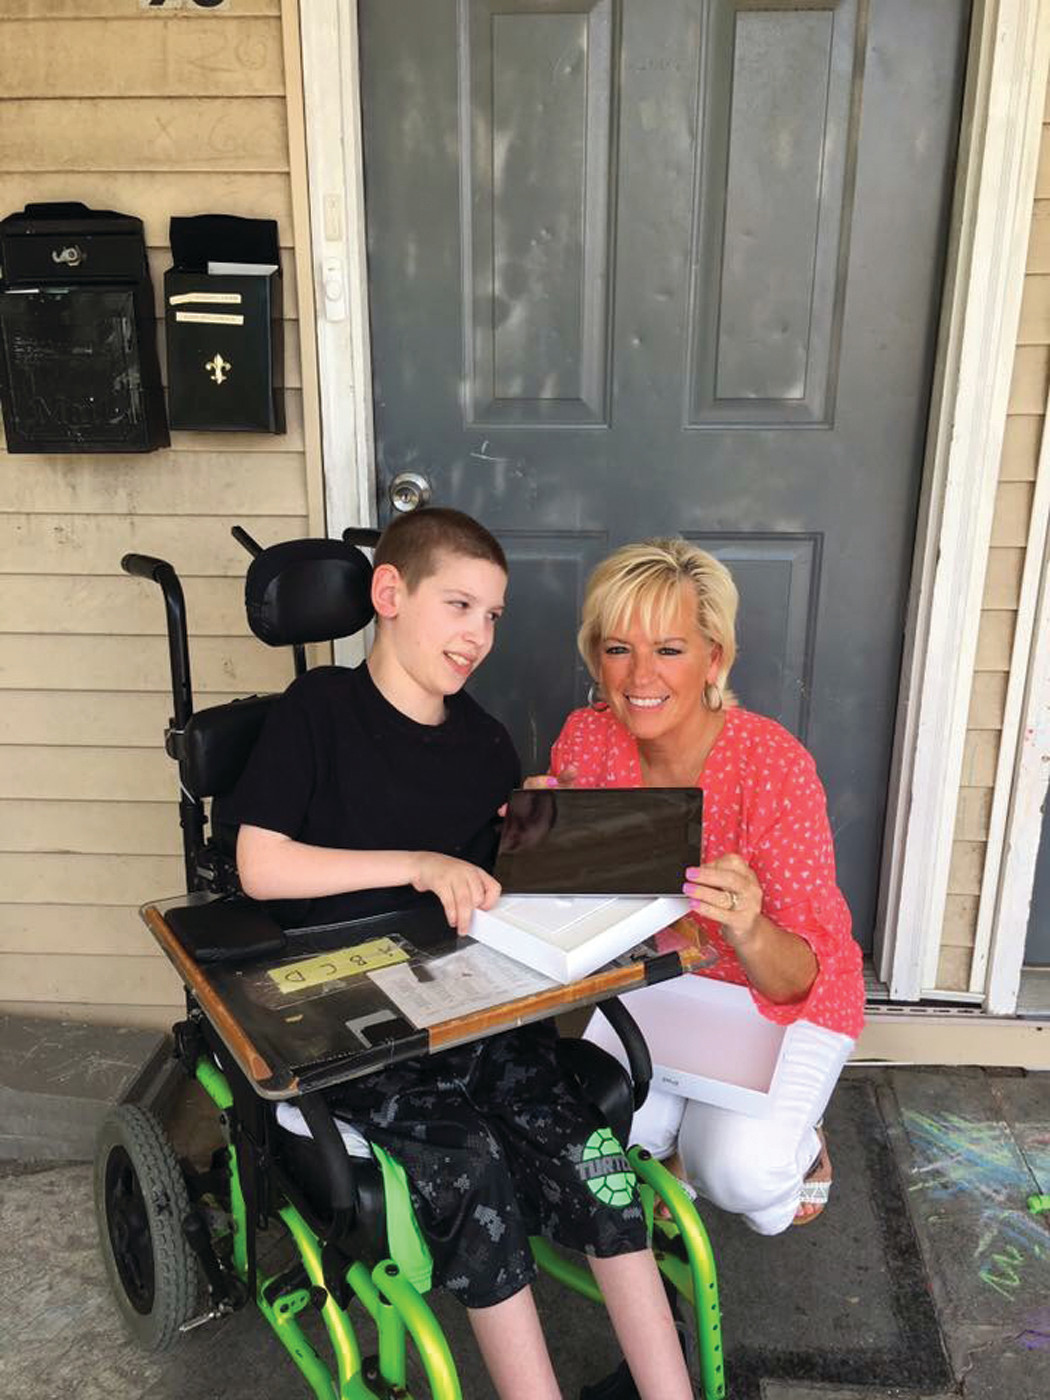 CLOUD-BASED ANGEL: Debbie Roffo with Jeremy, who has cerebral palsy and communicates with an iPad. When his iPad broke, his mother wondered how she would get the money to fix it. Roffo's angels stepped up and bought him a brand new one.